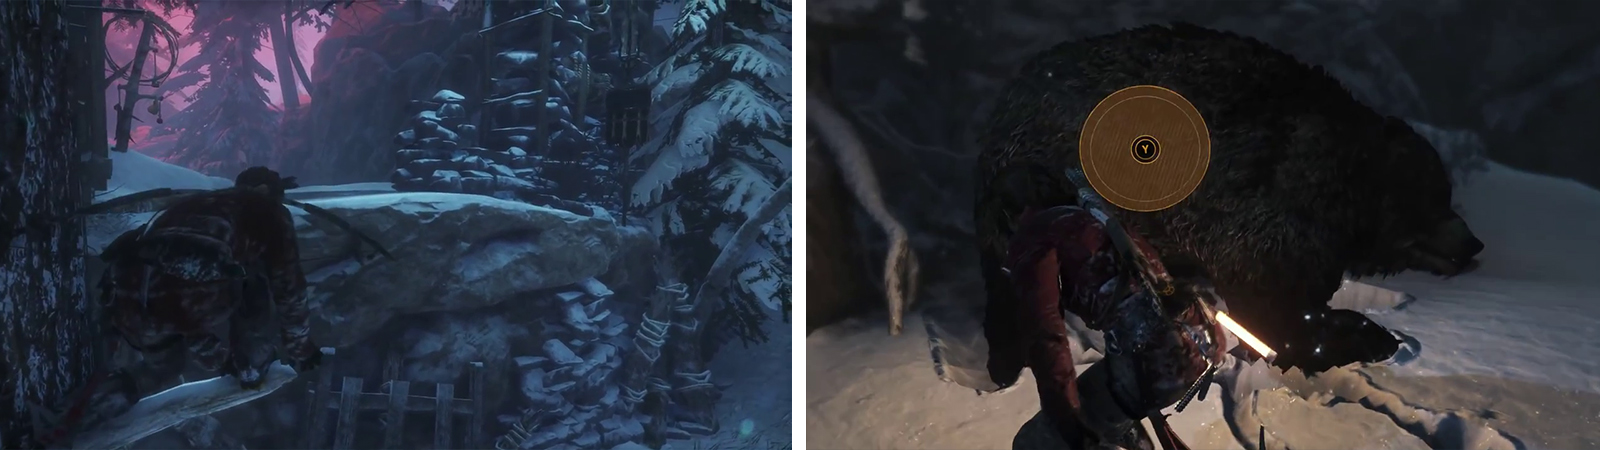 Climb up to the upper ledge by the camp (left). After encountering the bear run away until you fight it - press the button prompt to end the fight (right).